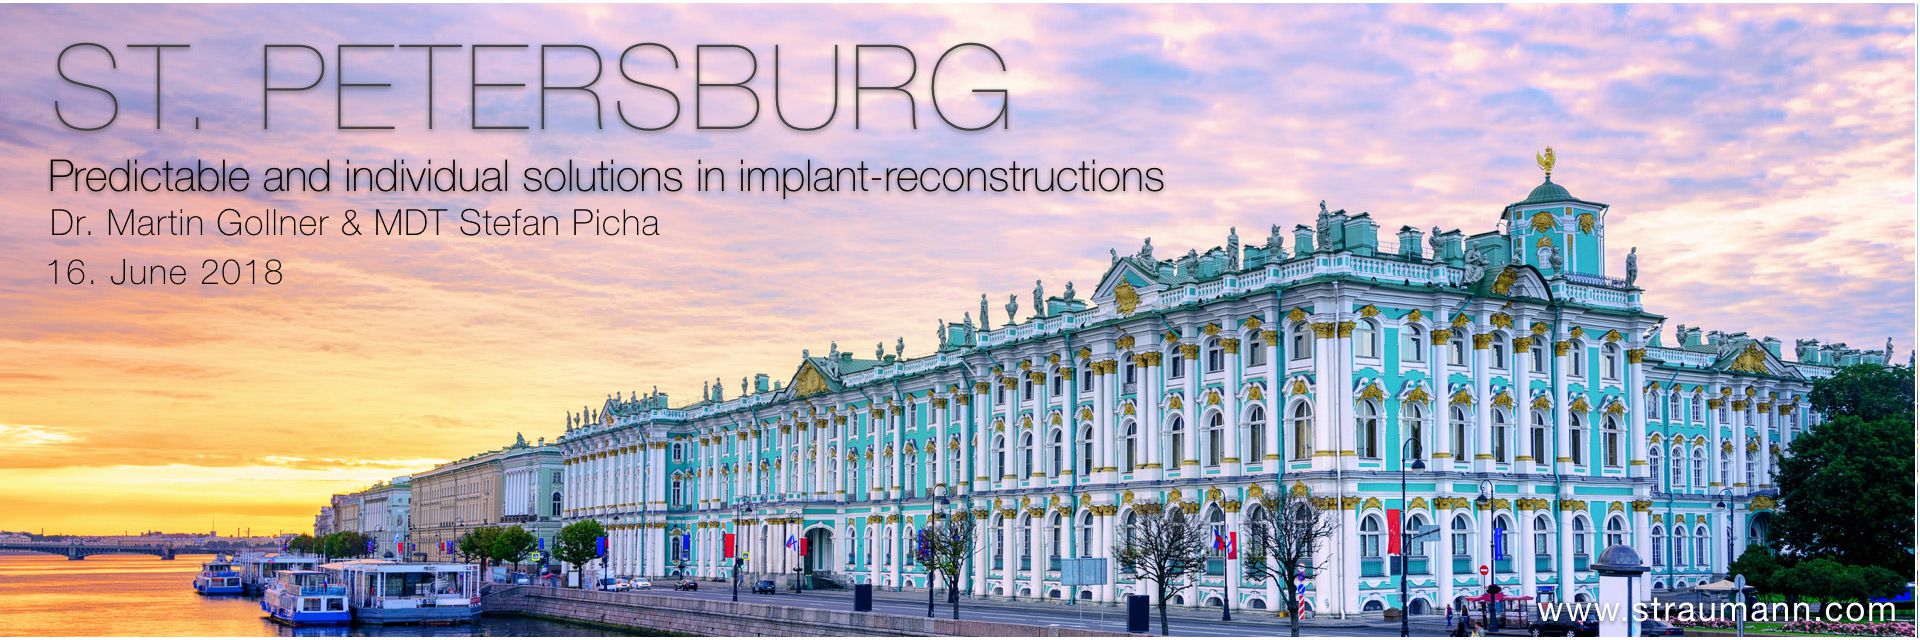 Predictable and individual solutions in implant-reconstructions - St. Petersburg